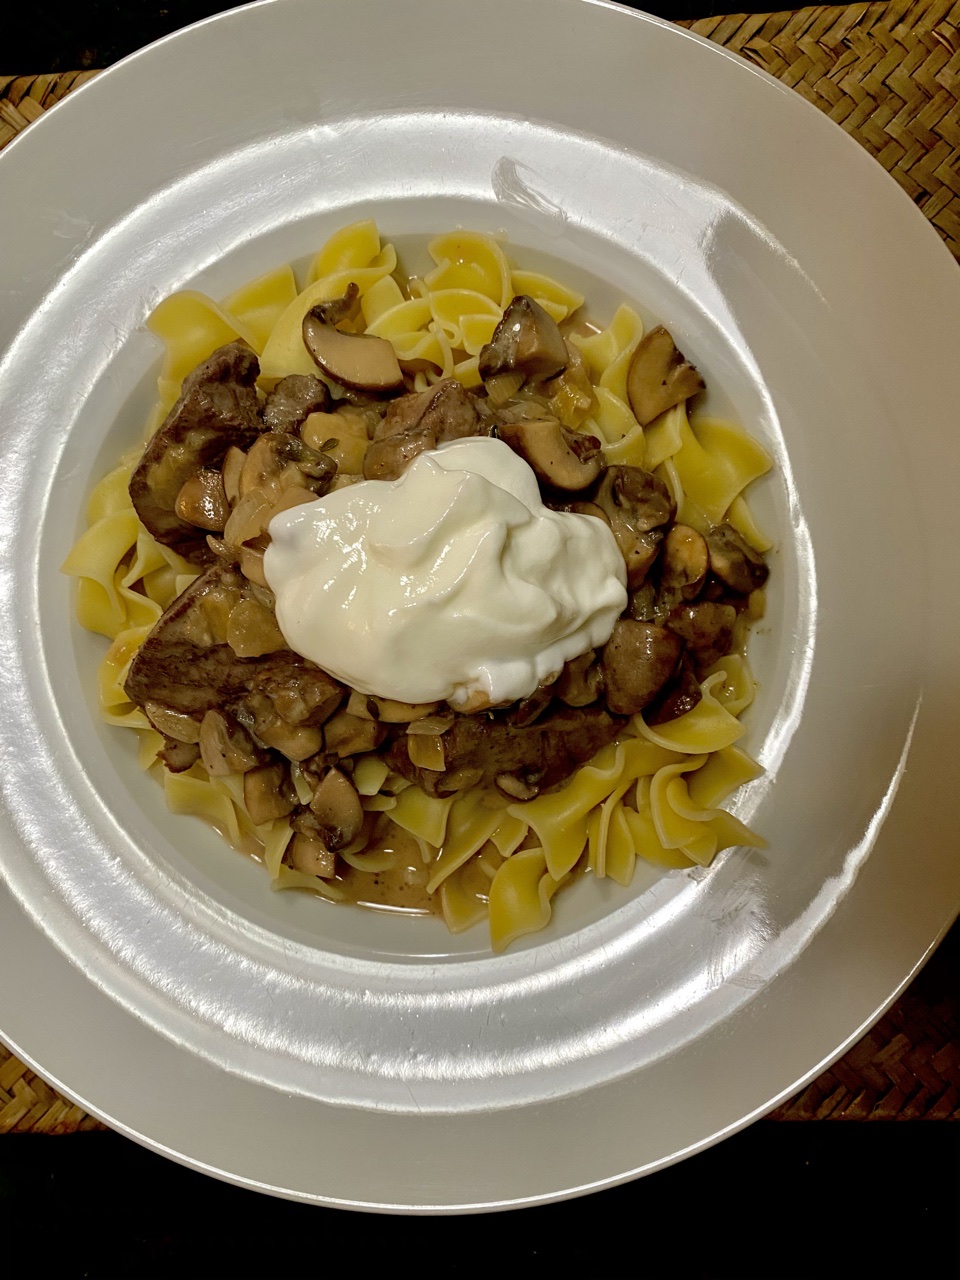 BC4A47E9 D22E 4856 A619 60C740DDCFF5 - Authentic Beef Stroganoff from Scratch